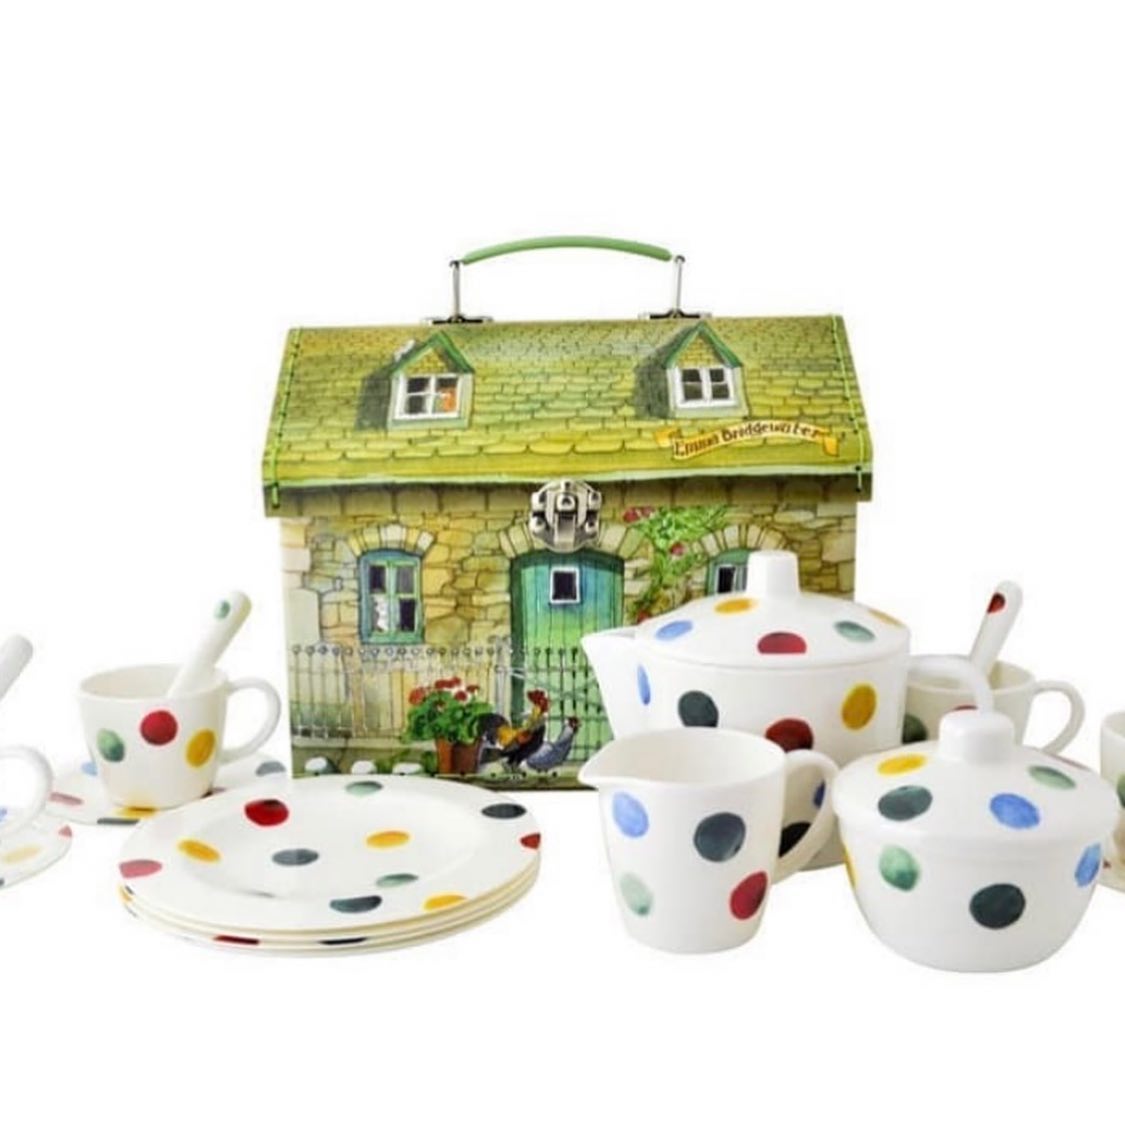 Green House And Polka Dots Tea Set — Children & Babywear In Central Highlands, QLD